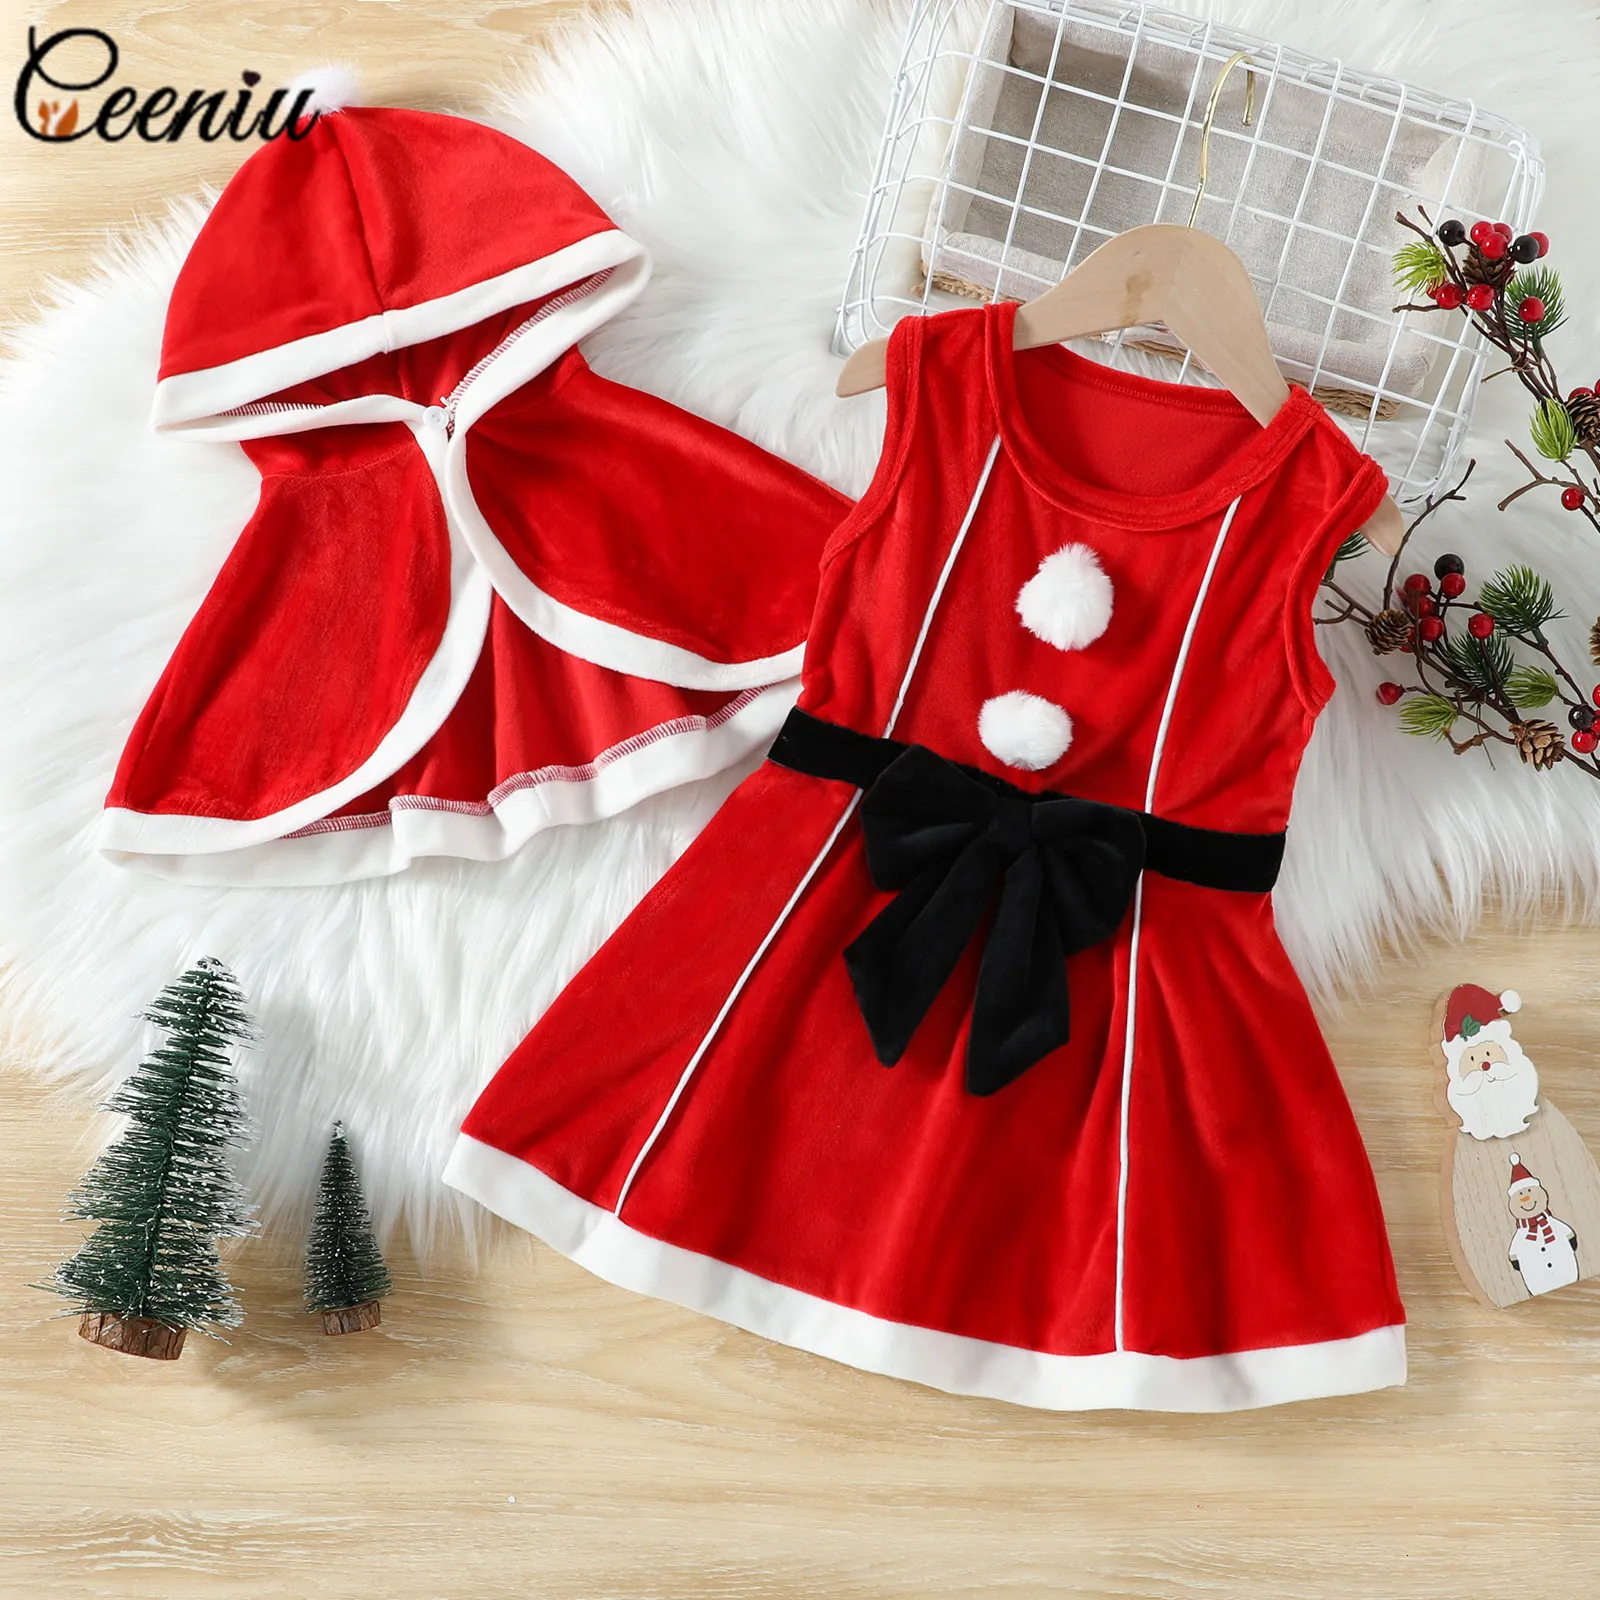 Girls Dresses Ceeniu 26Y Year Hooded Red Cloak CapeHairball Belted Velvet Dress Kids Children Christmas Outfits Clothes 230901